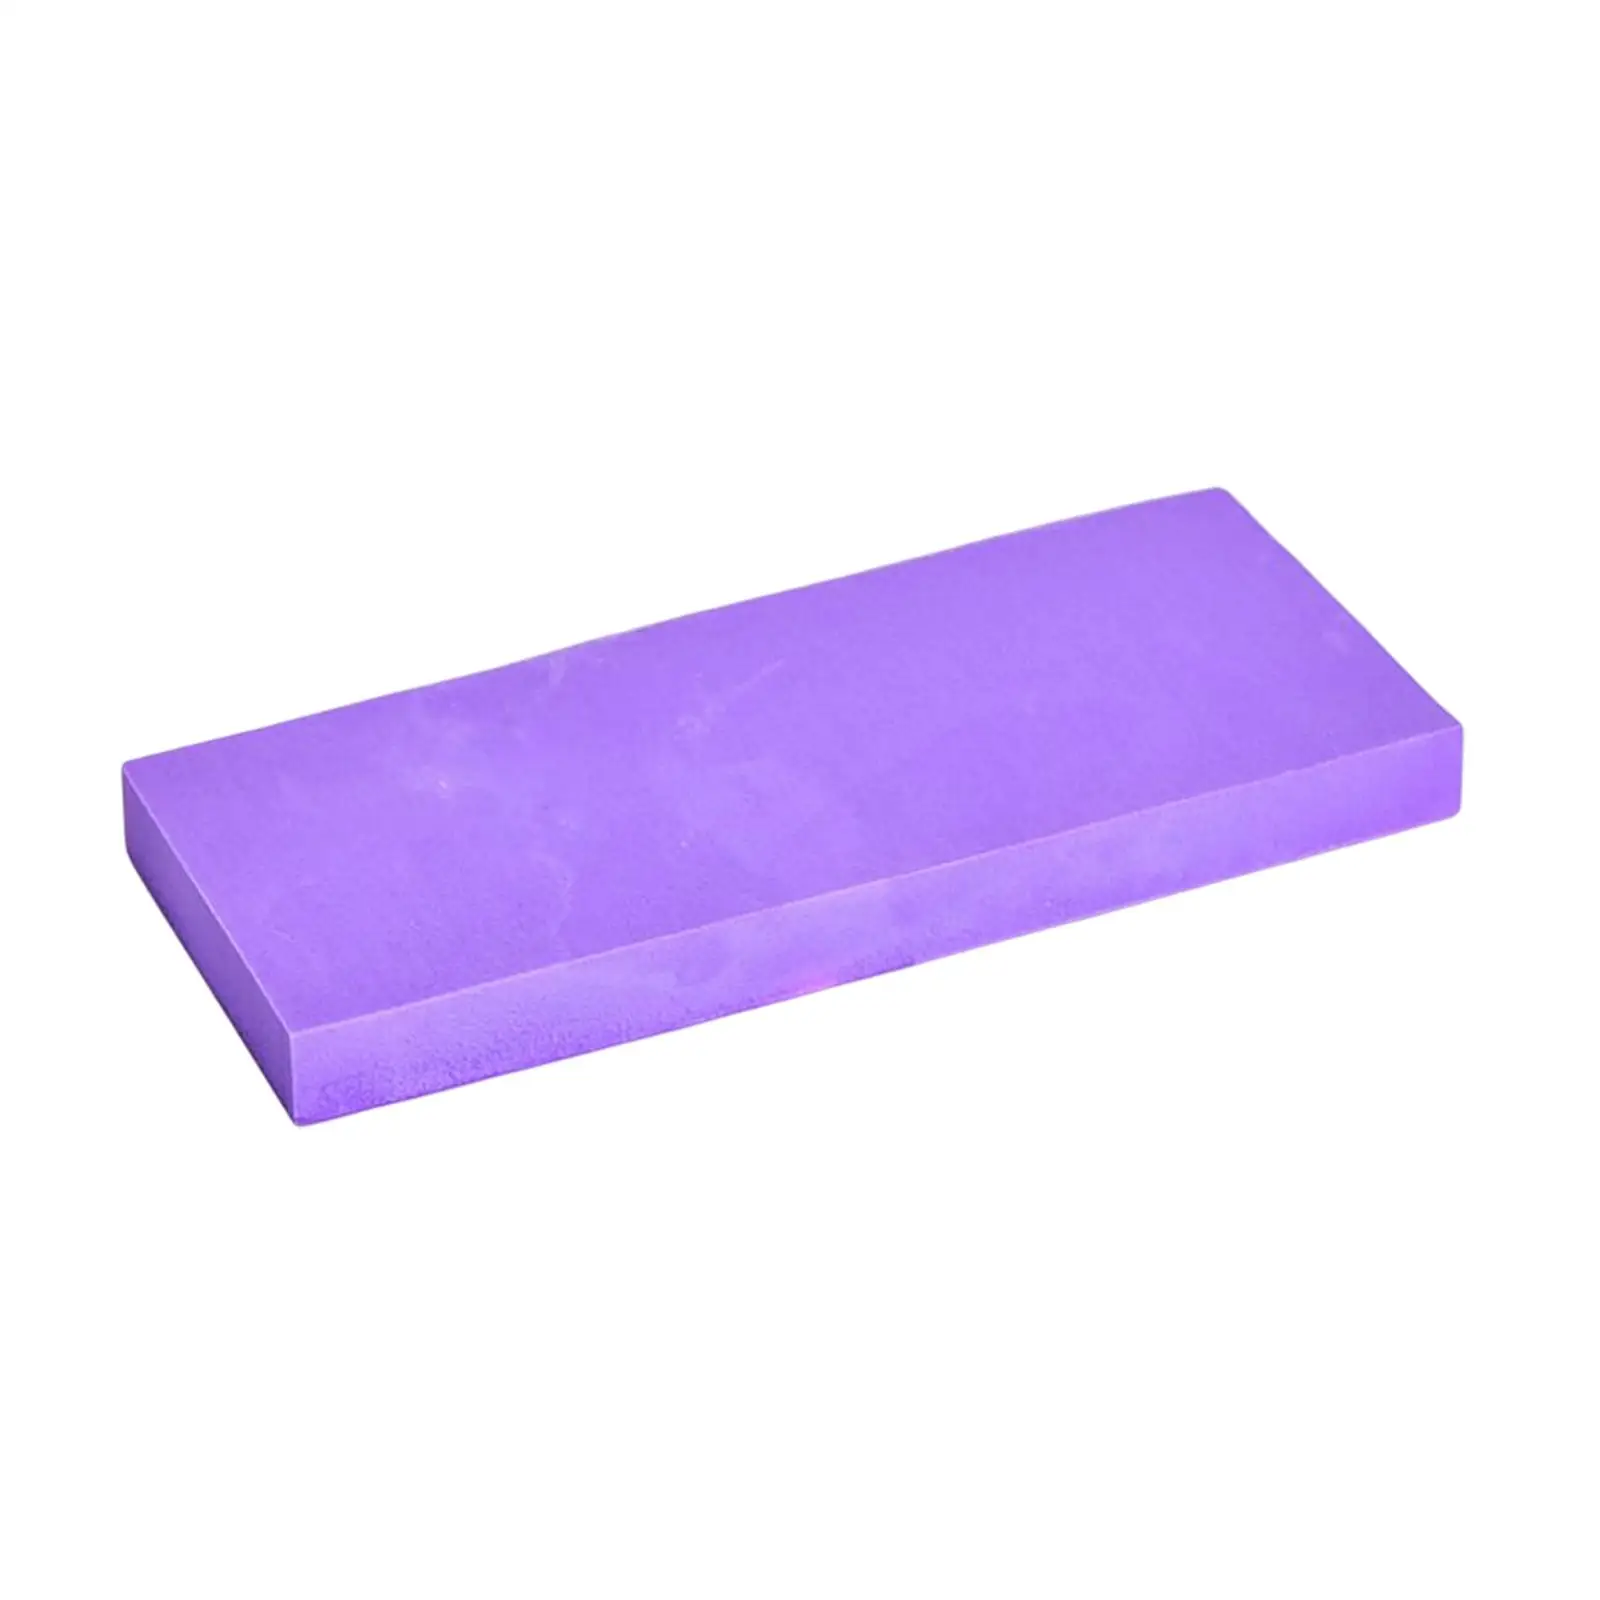 Strong Water Absorbing Sponge Ceramic Art Tool Cleaning Sponge for Ceramic Craft Shaping